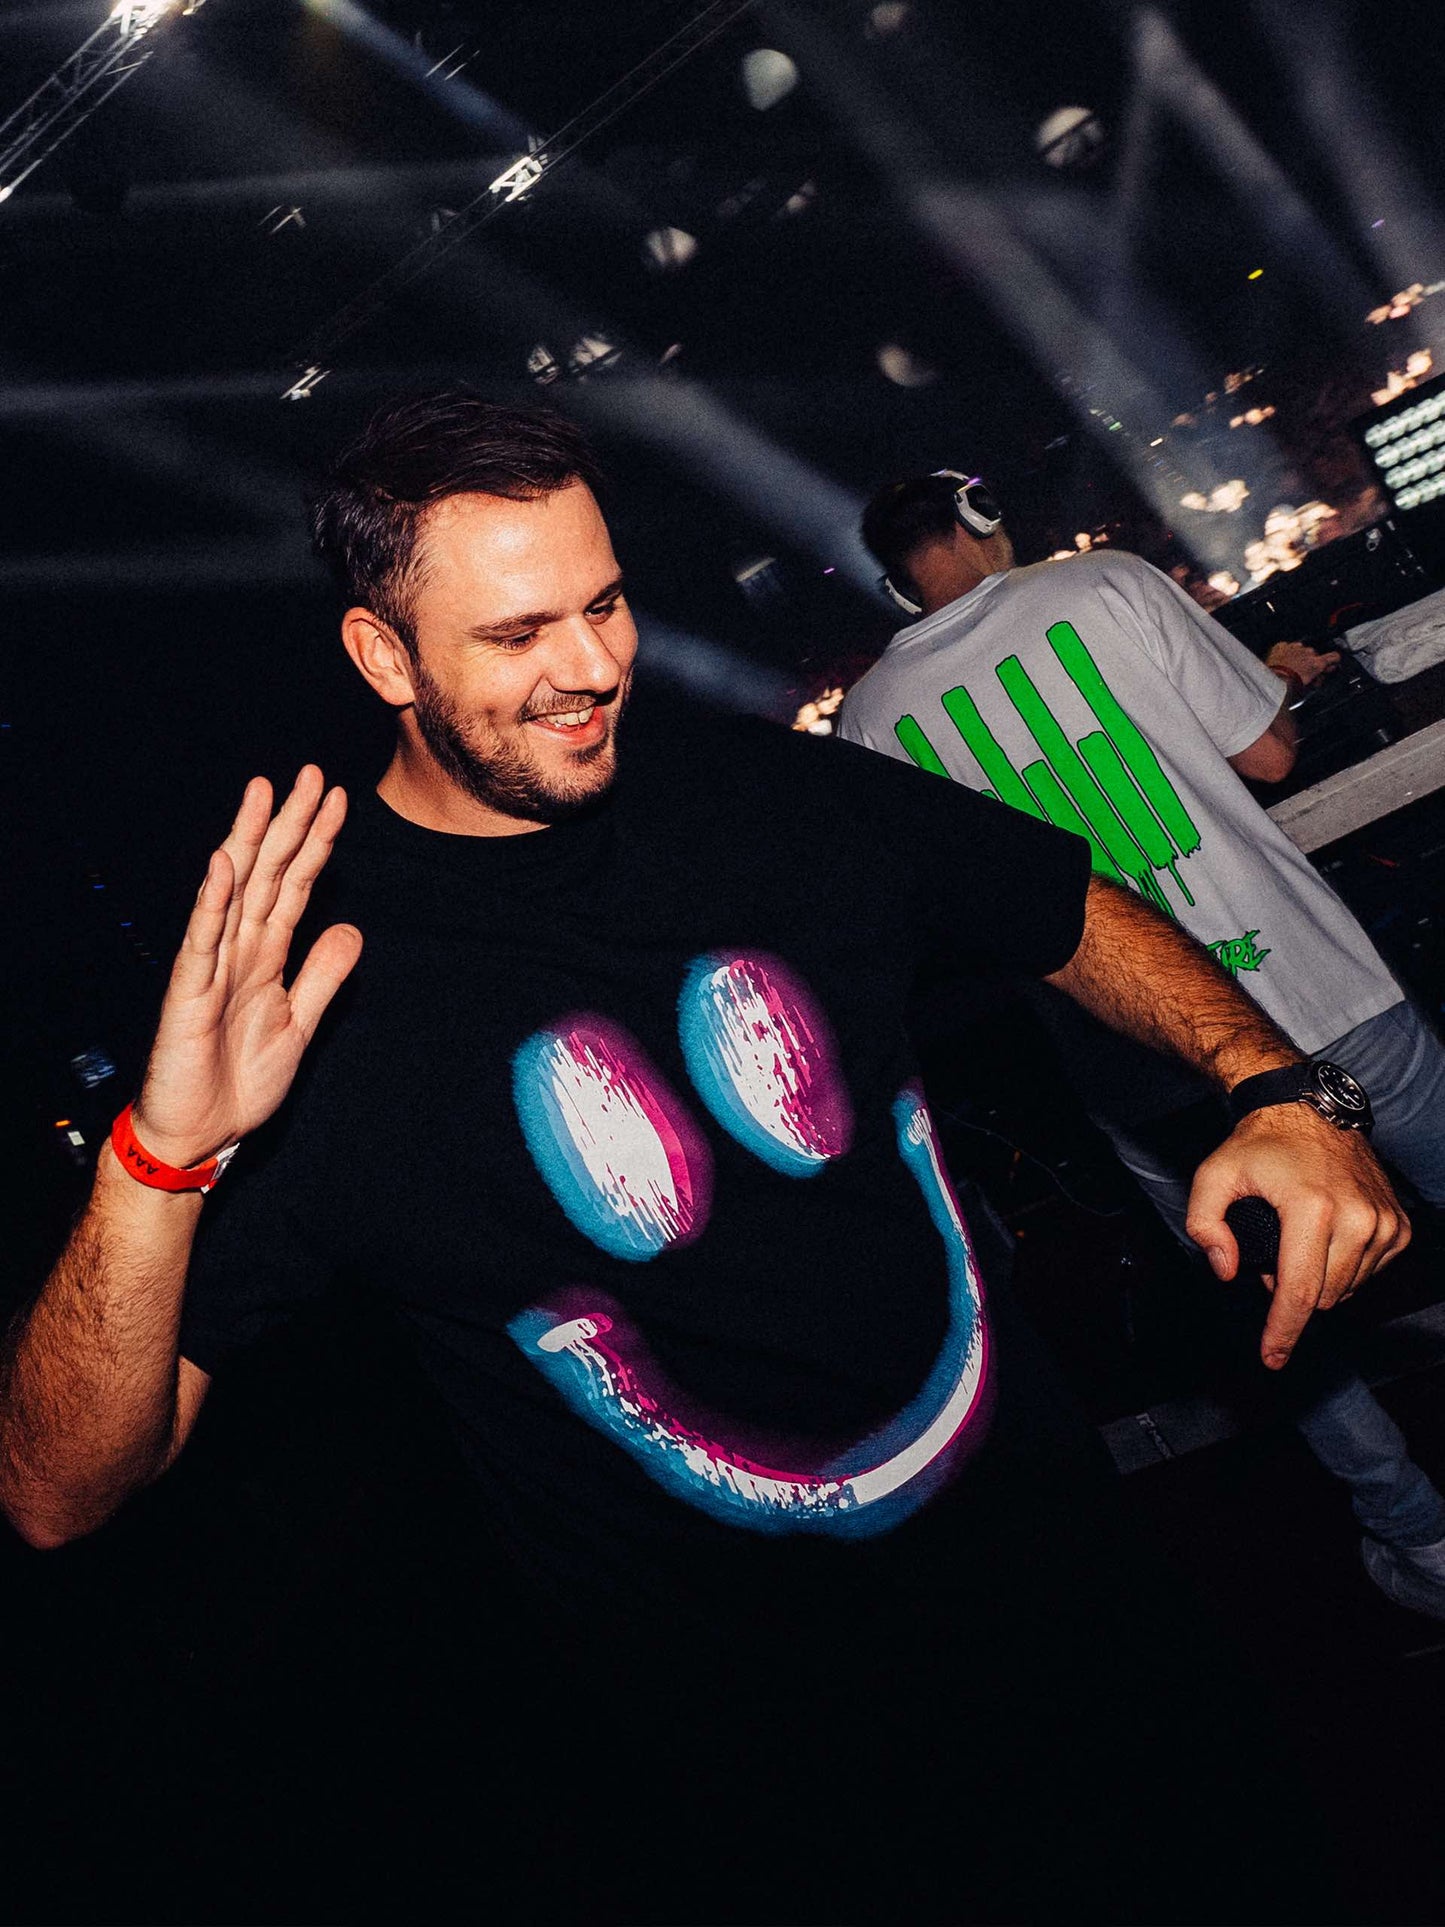 W&W wearing the Rave Culture Glow Smiley T-Shirt - Rave Culture Shop